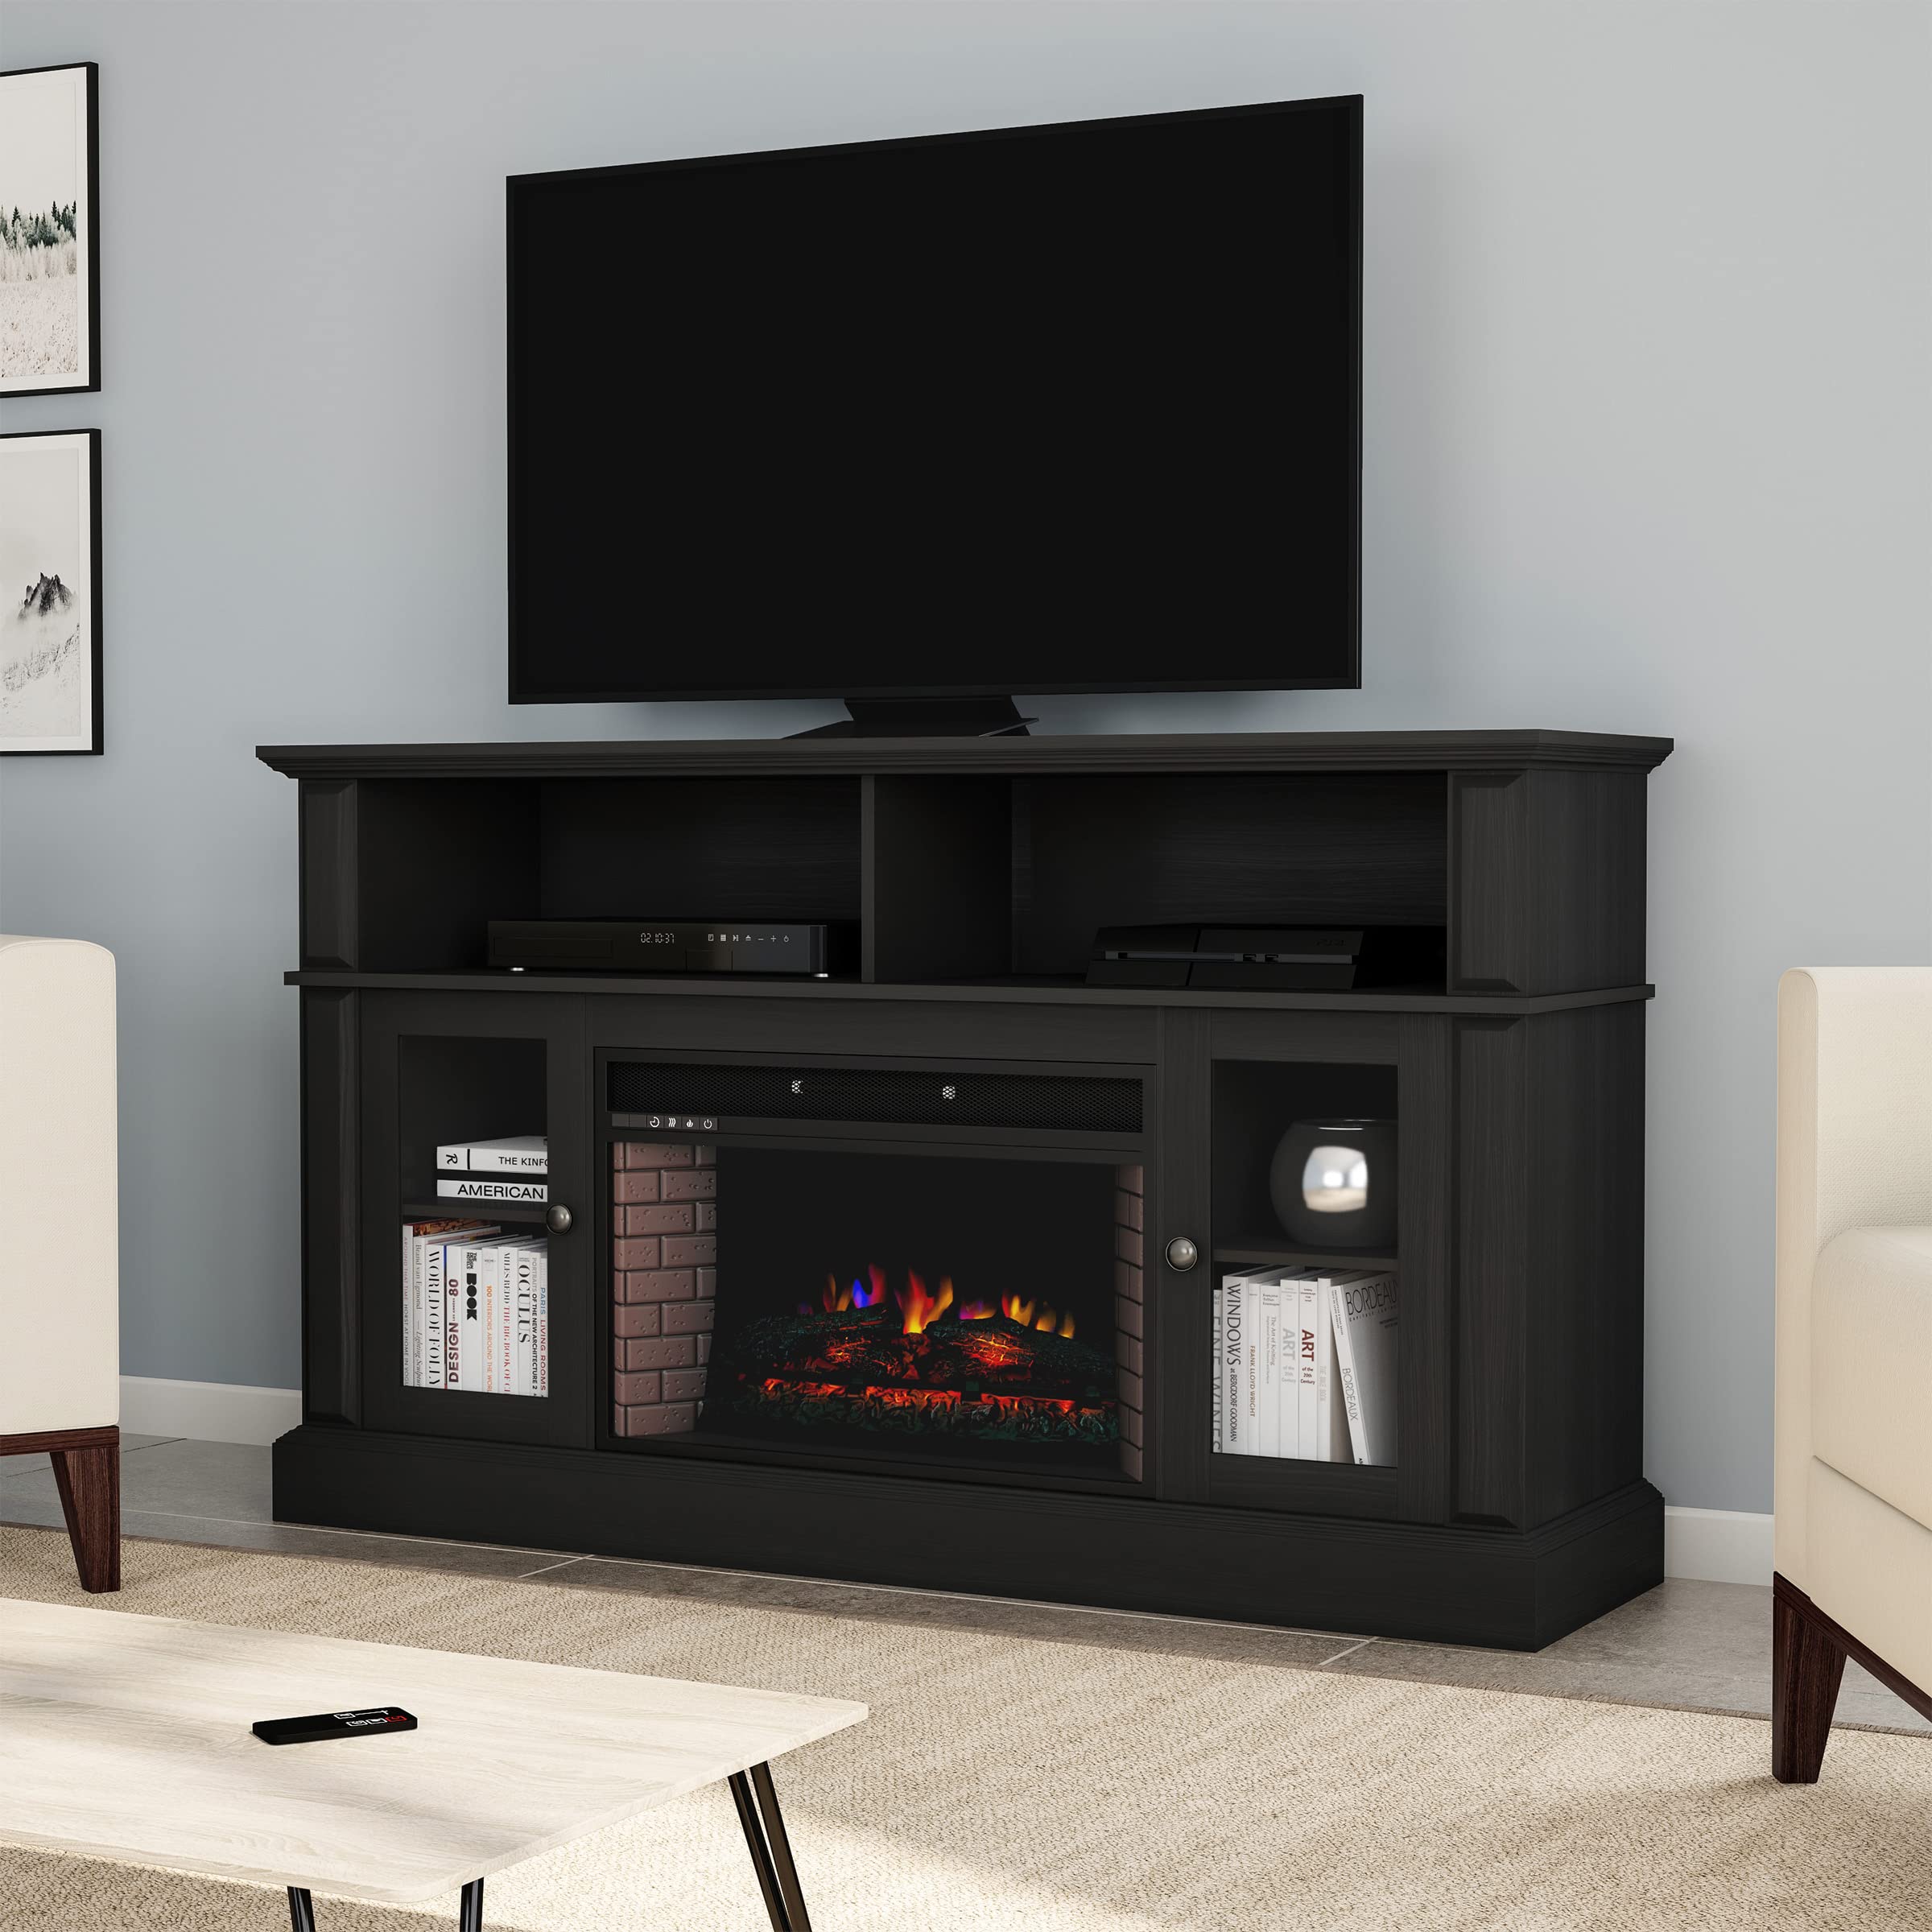 59-Inch Long Electric Fireplace TV Stand Entertainment Center Console with Remote, LED Flames, Adjustable Heat by Northwest (Black)